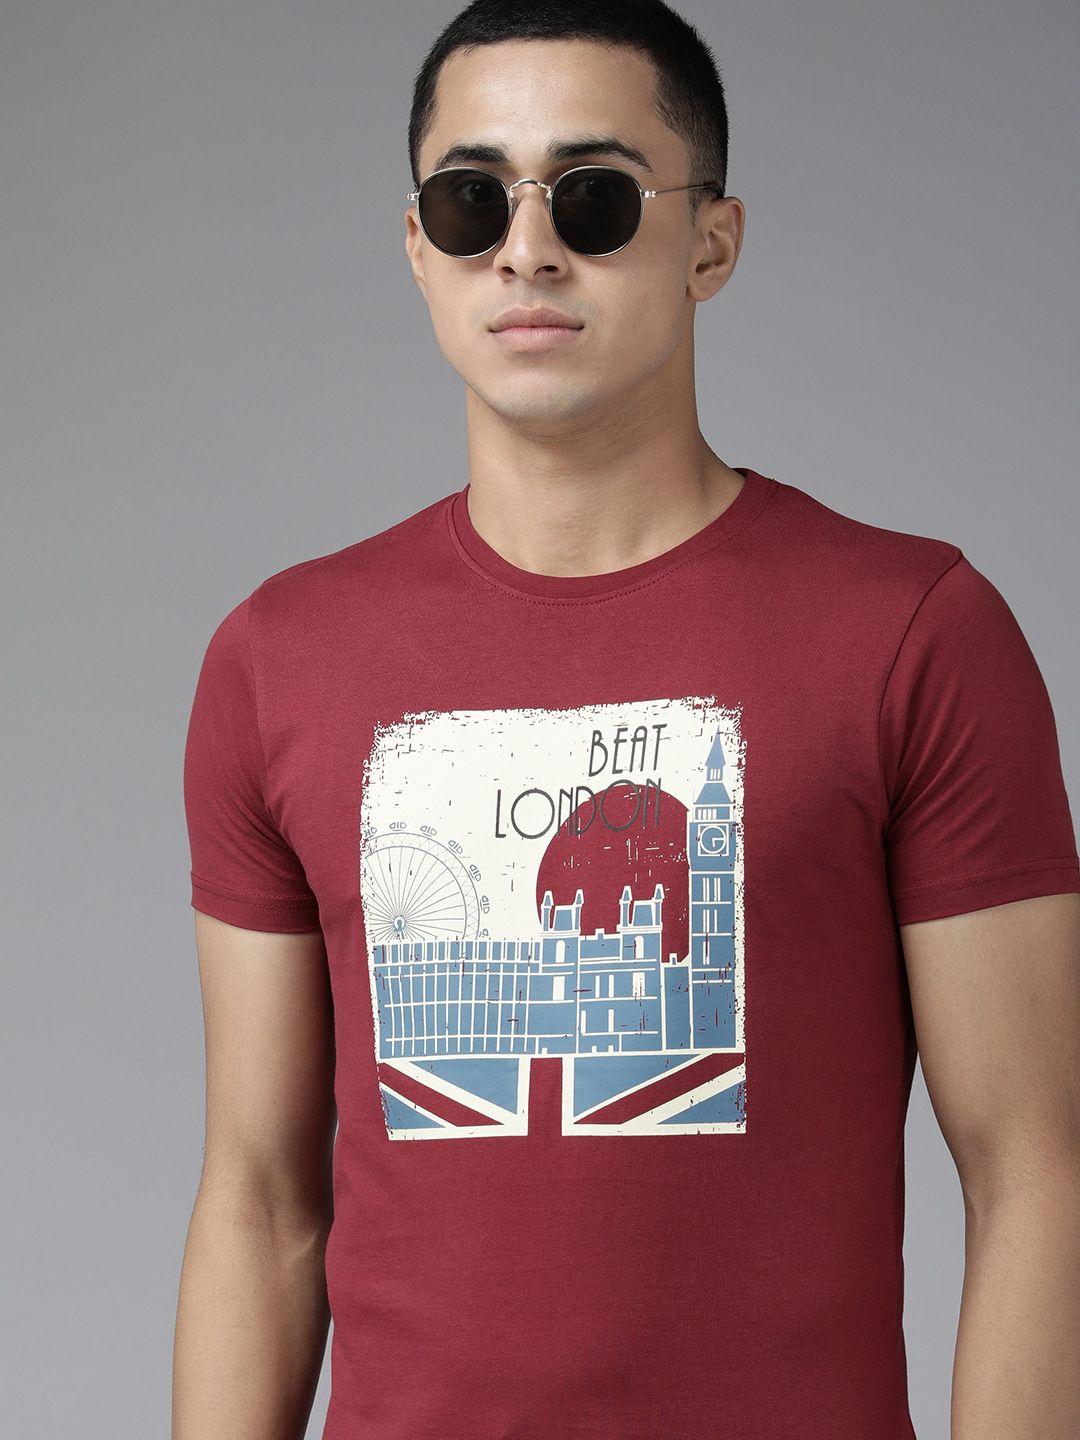 beat london by pepe jeans men red printed pure cotton slim fit t-shirt